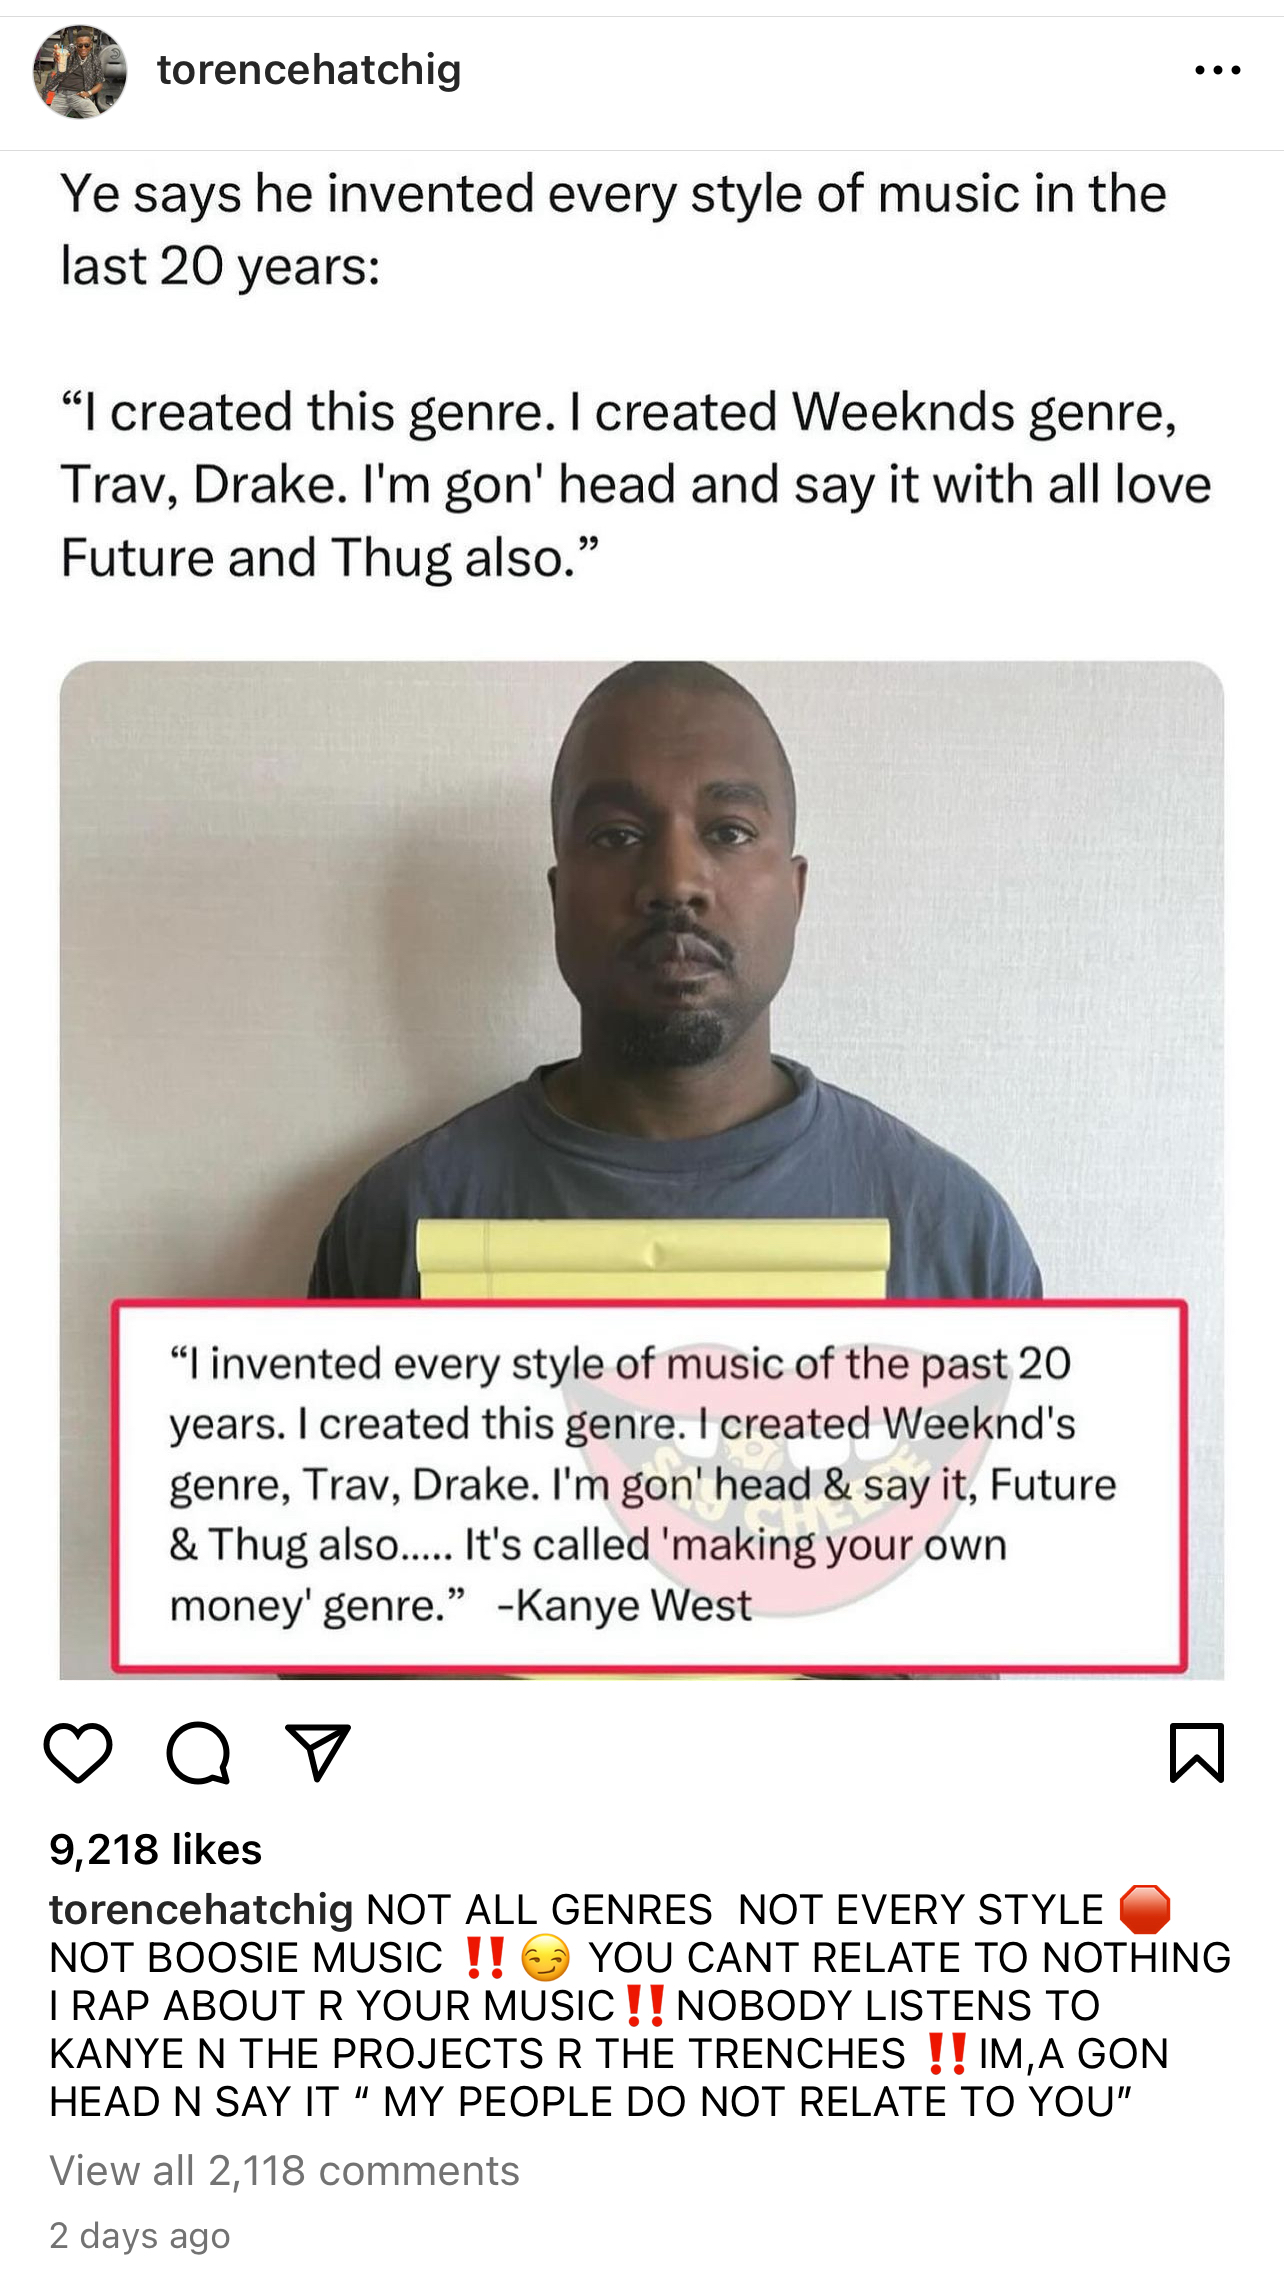 Instagram screenshot. Kanye West poses with quote about inventing a music style, surrounded by social media interface elements